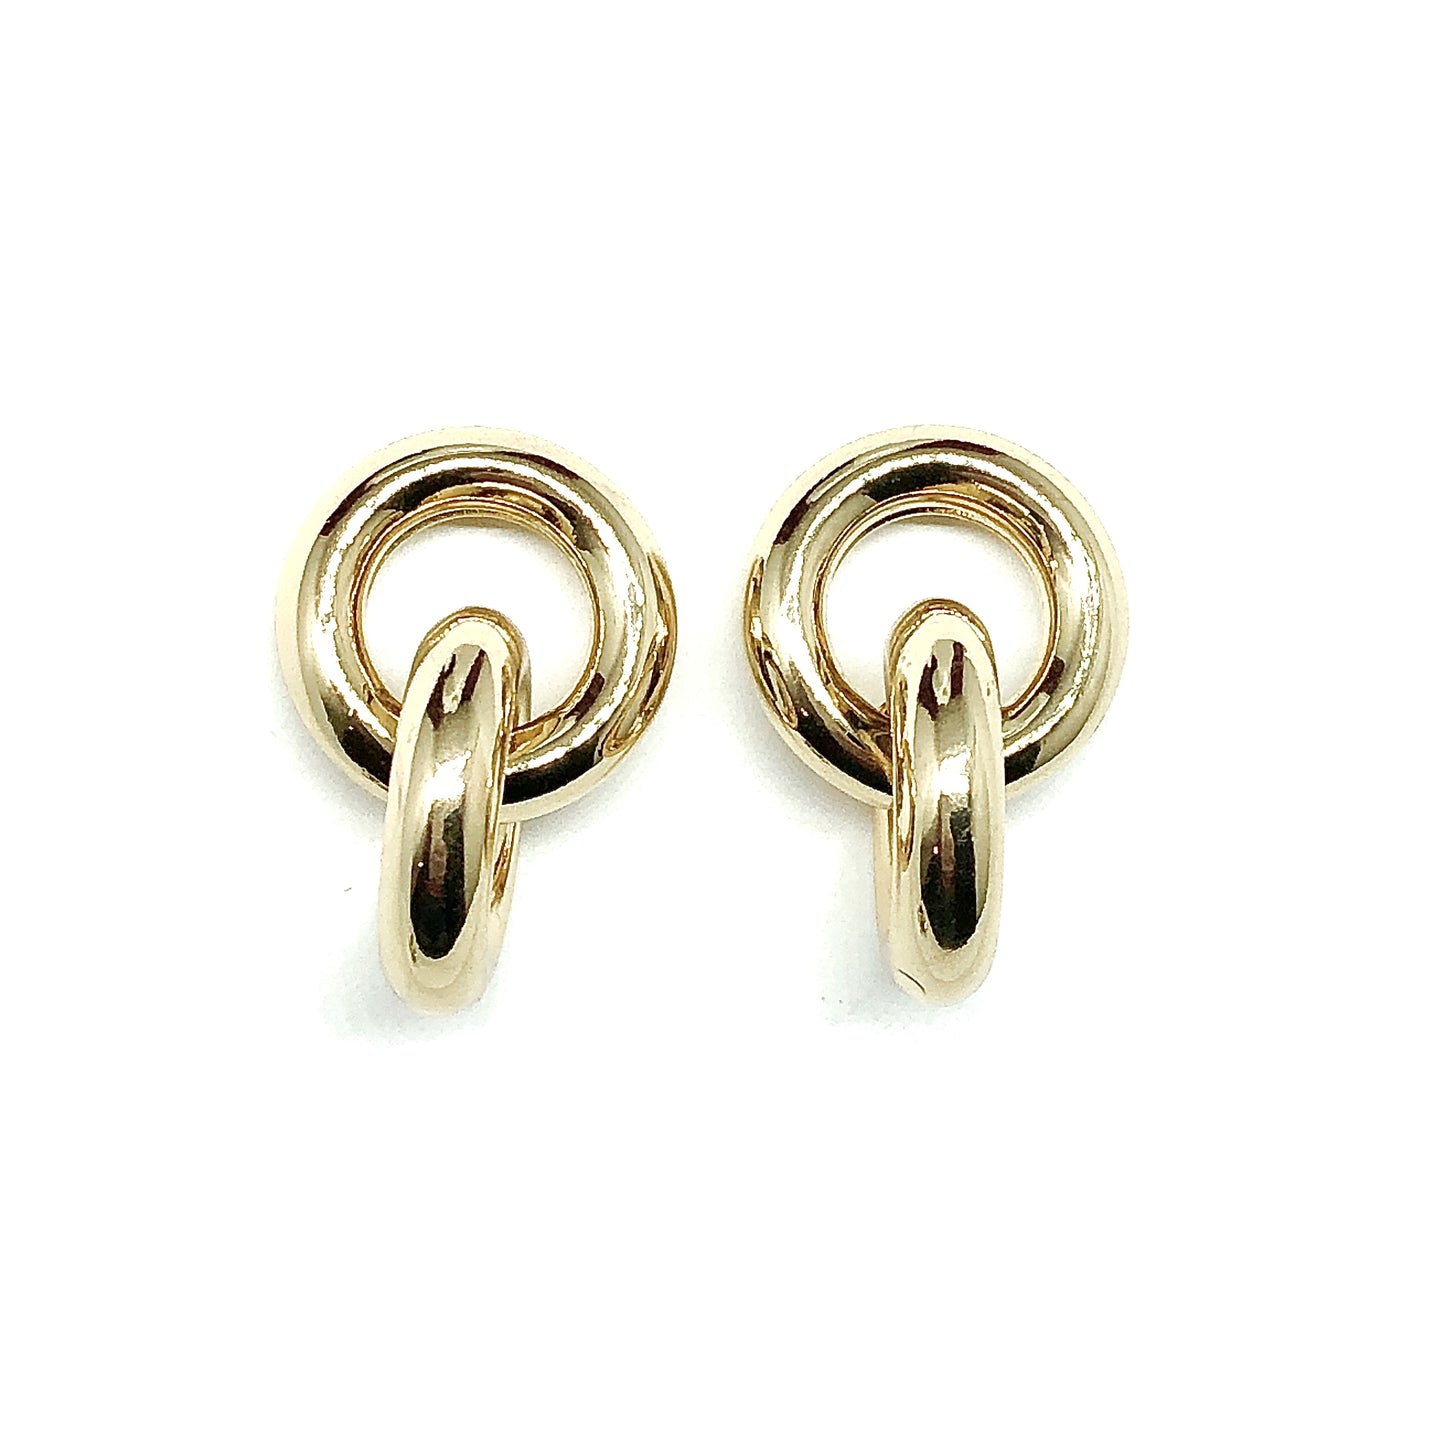 Save Big & Look Good in Estate Jewelry | Chunky 2 Ring Design Golden Circle Earrings